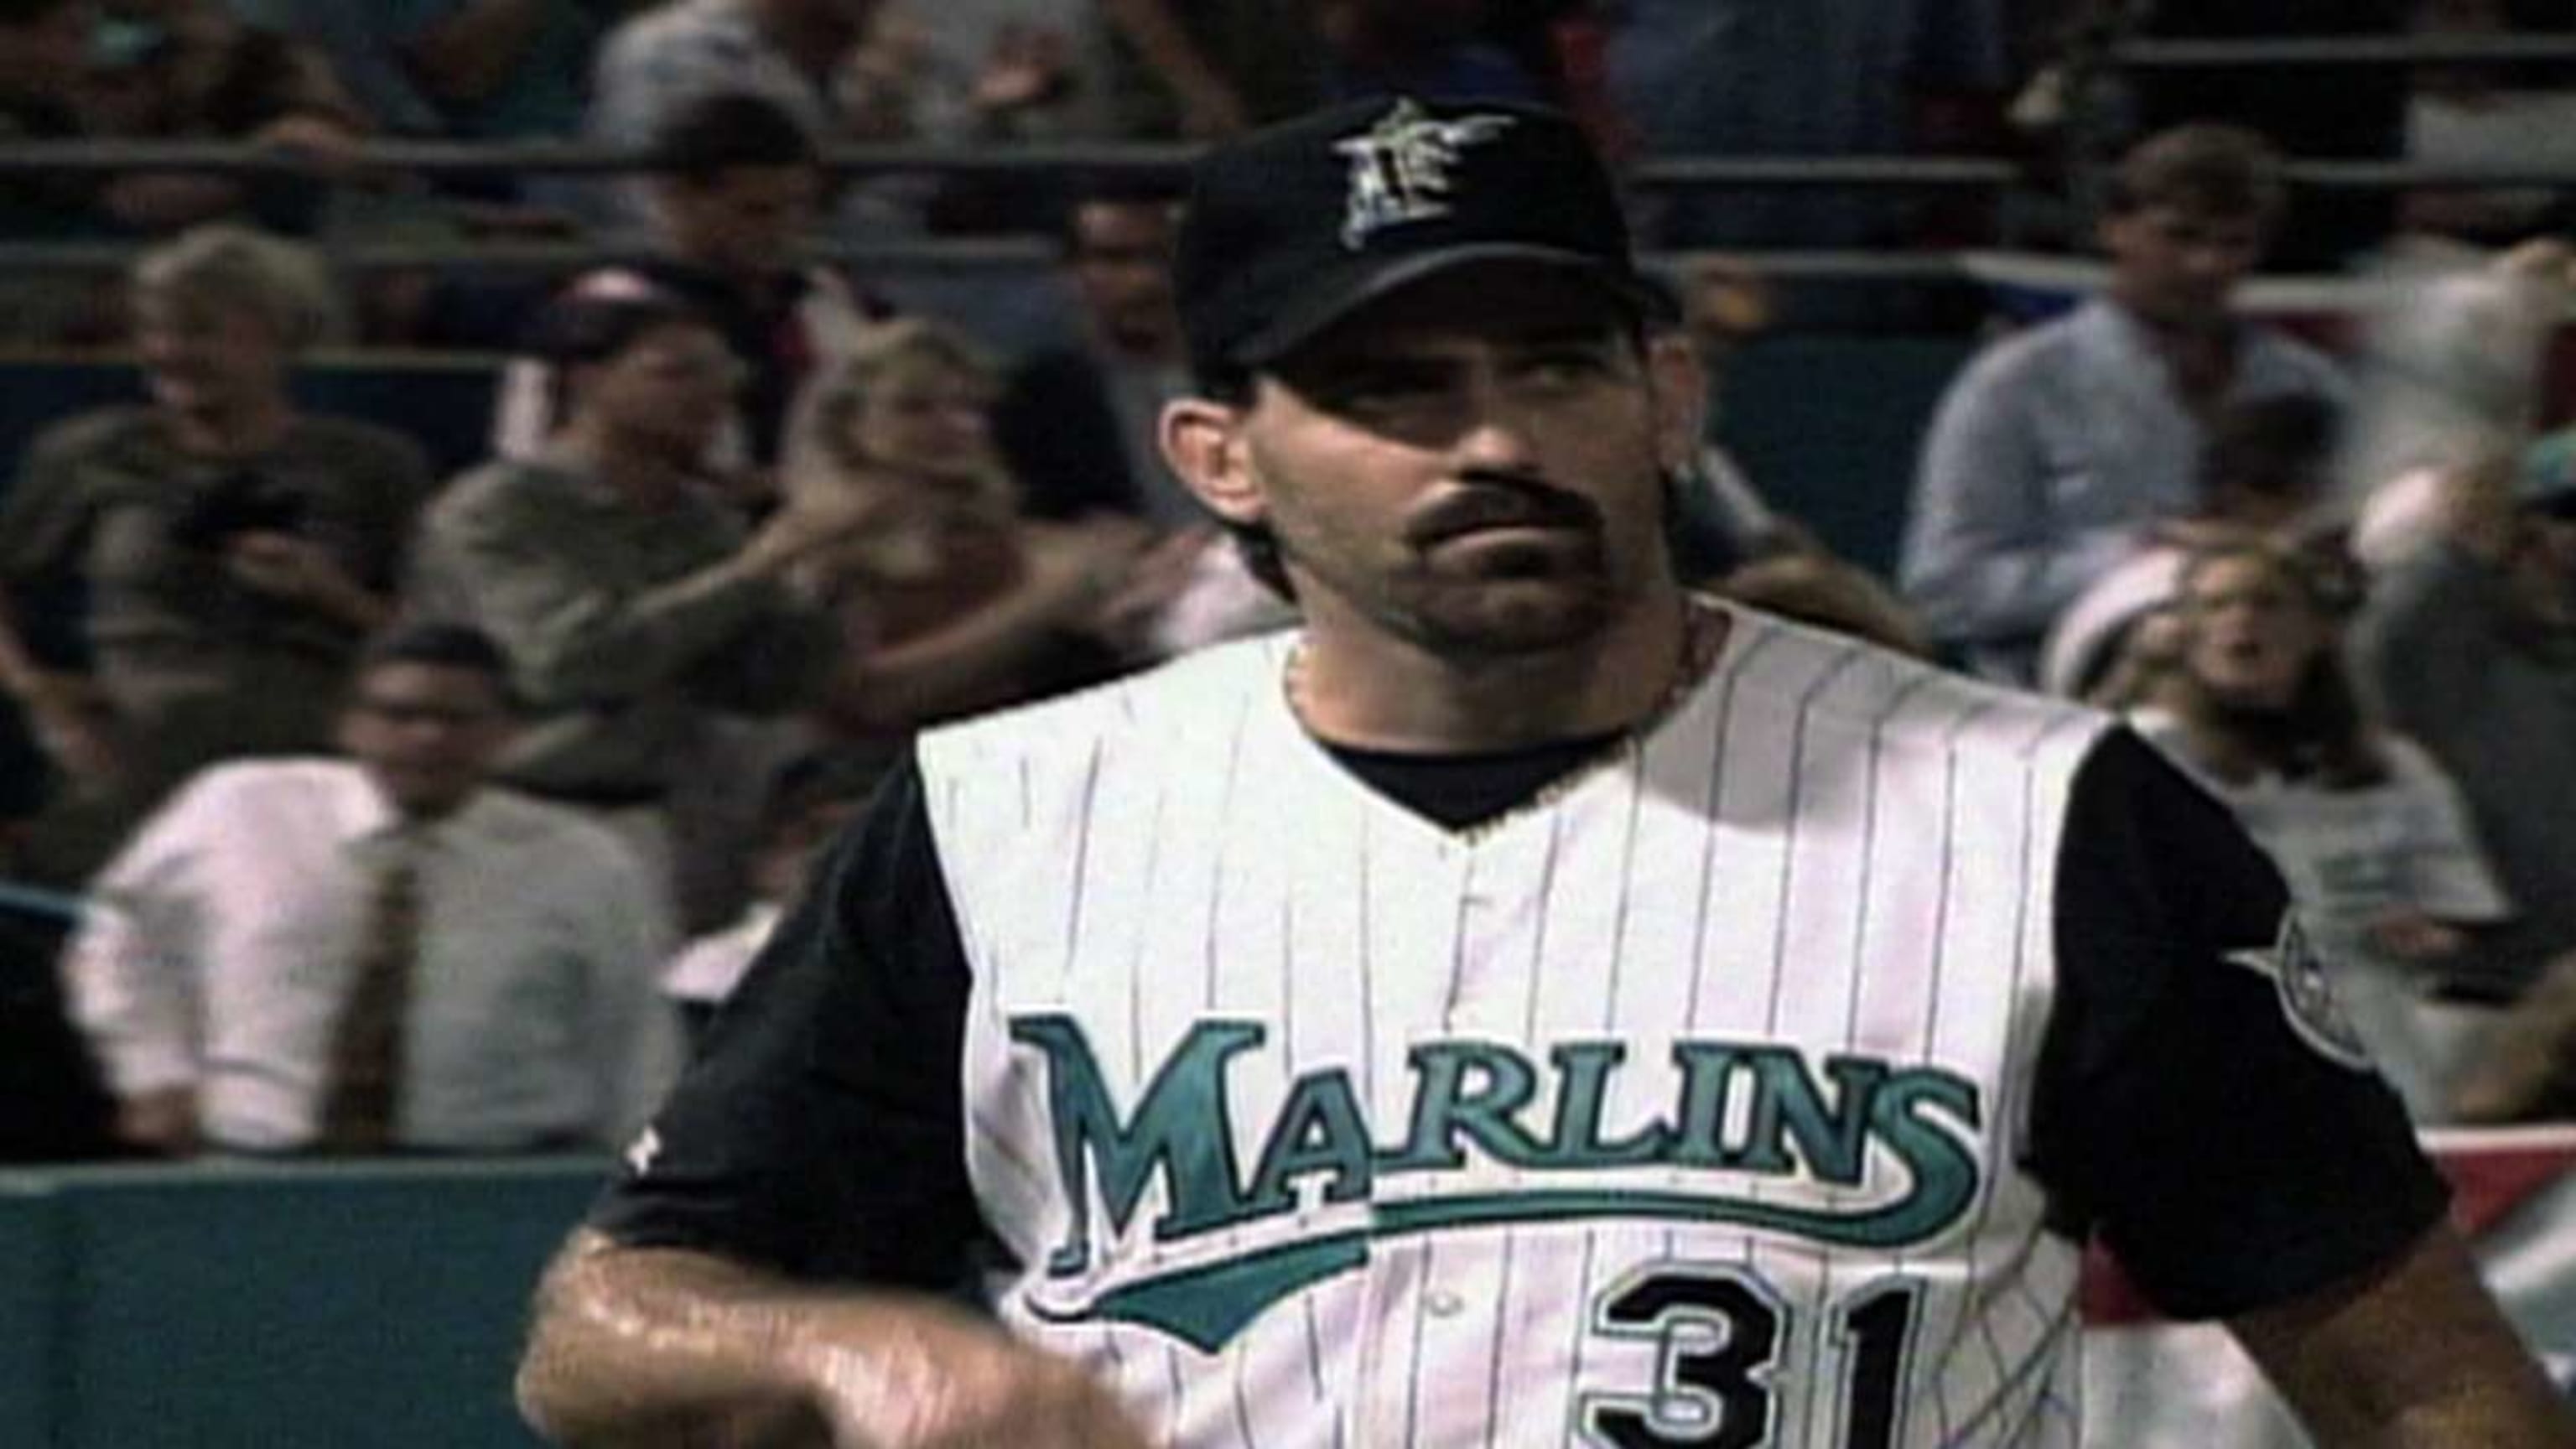 Miami Marlins - Give us your input on next year's throwback unis. What do  you want to see the guys wear next season for #ThrowbackWeekend? marlins.com/dimelo  // #DimeloMiami